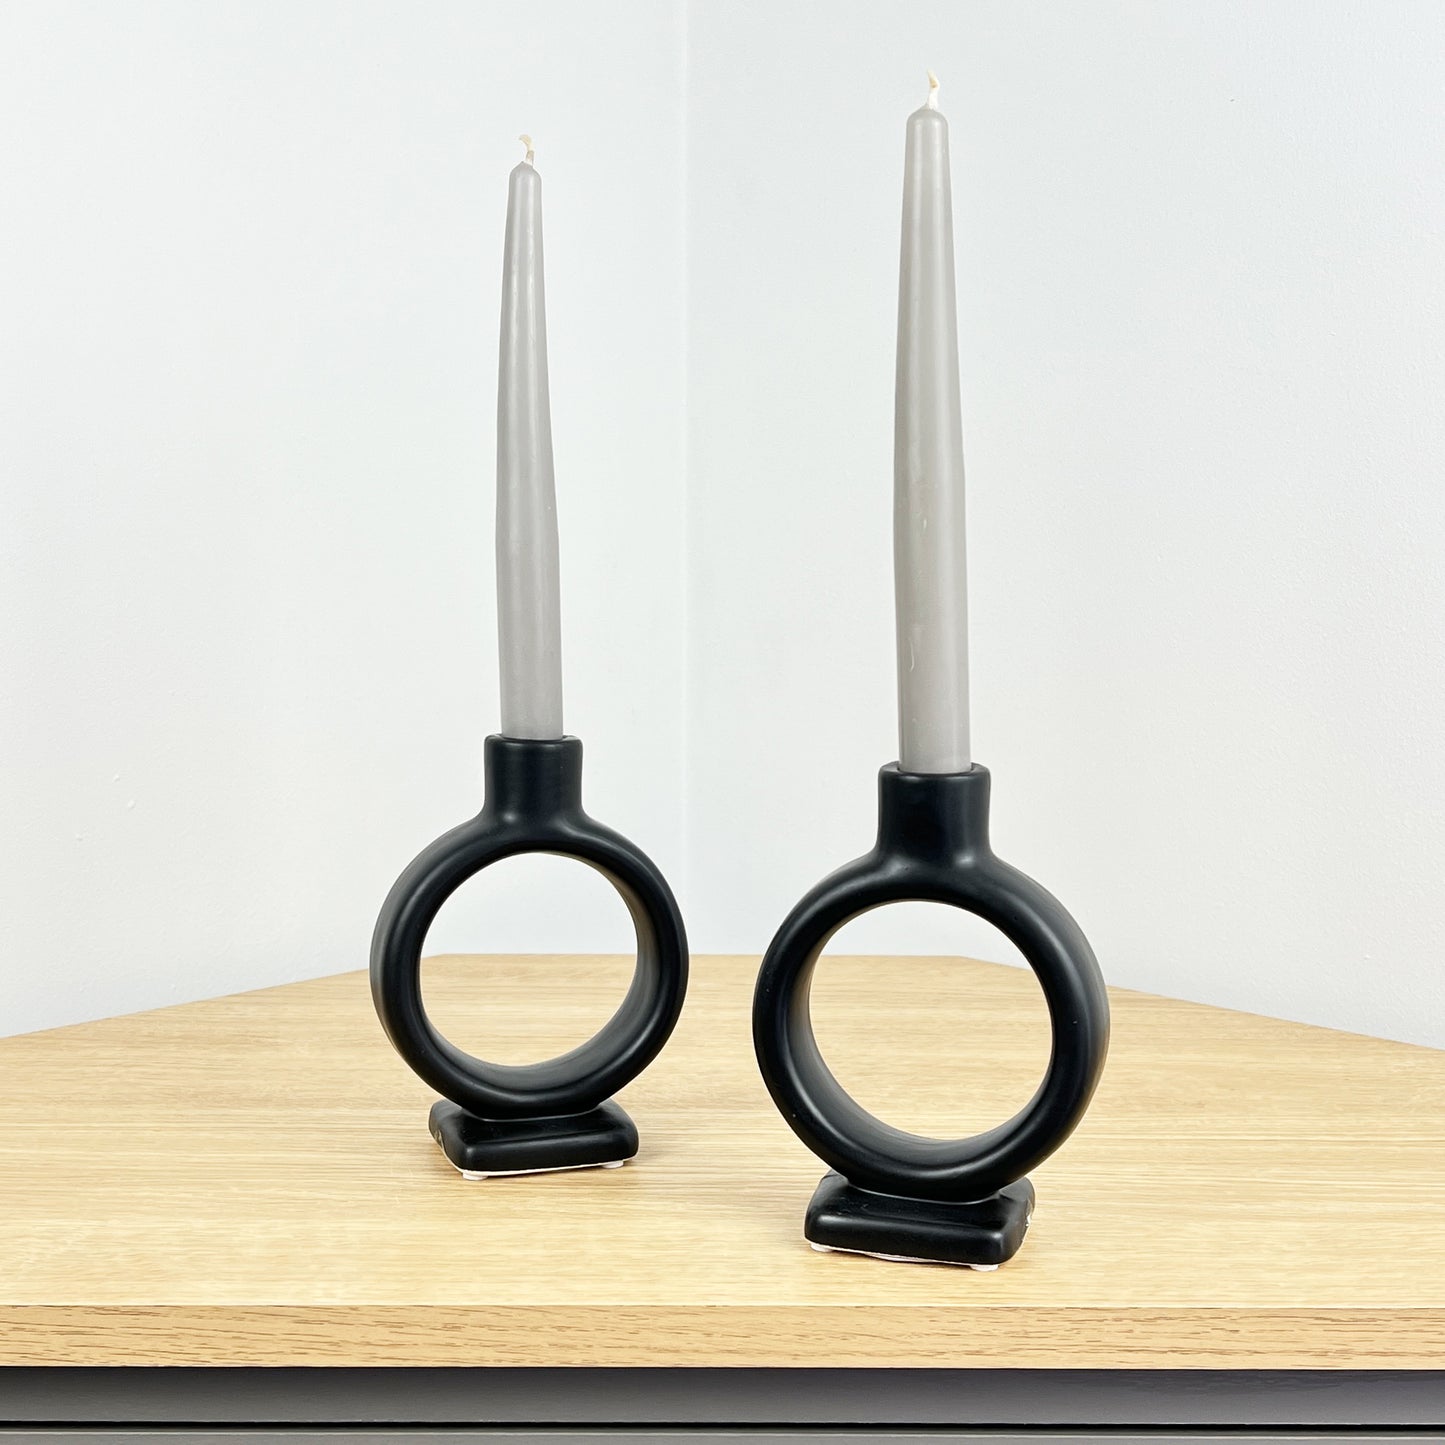 Pair of Black Round 'Donut' Candle Holders